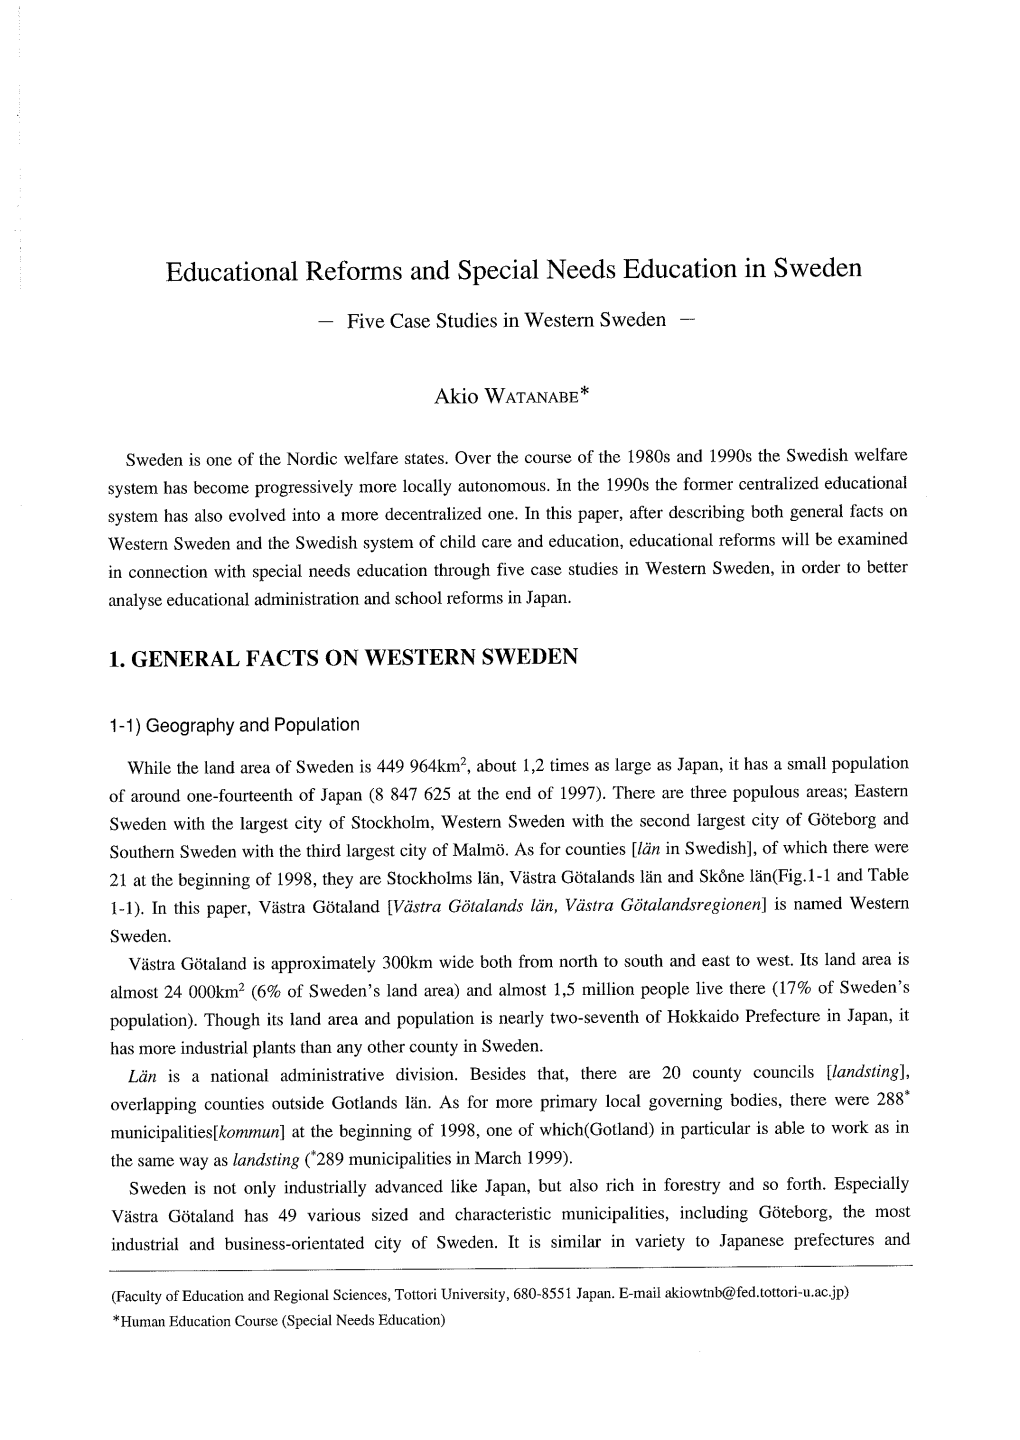 Educaiontt Refolllls and Special Needs Education in Sweden 1